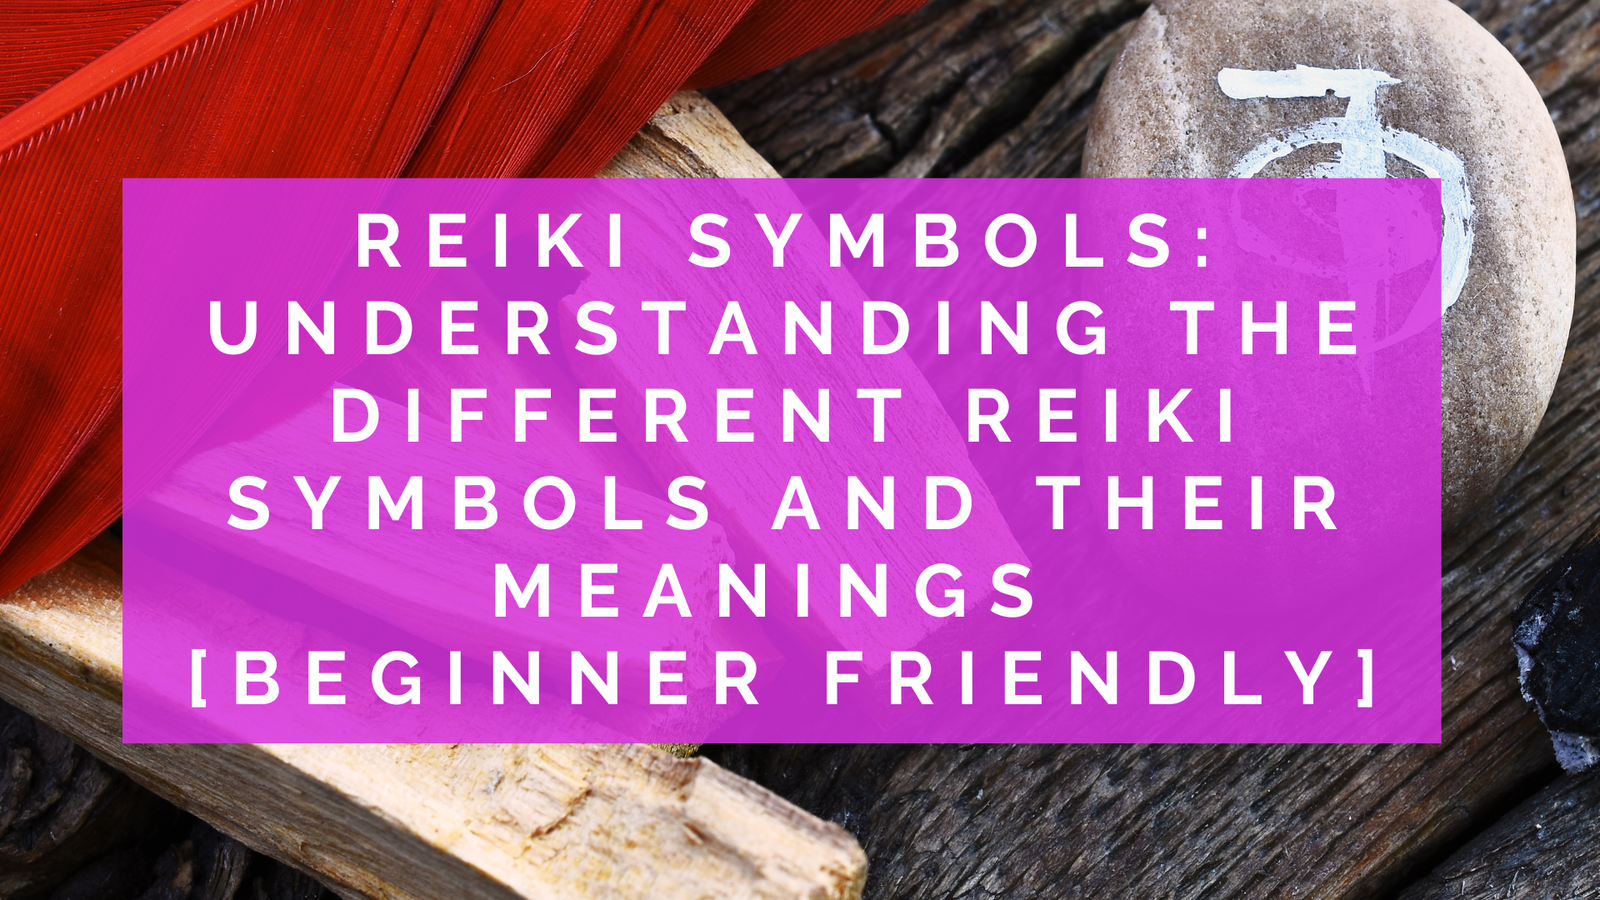 Reiki Symbols: Understanding the Different Reiki Symbols and Their Meanings [Beginner Friendly]